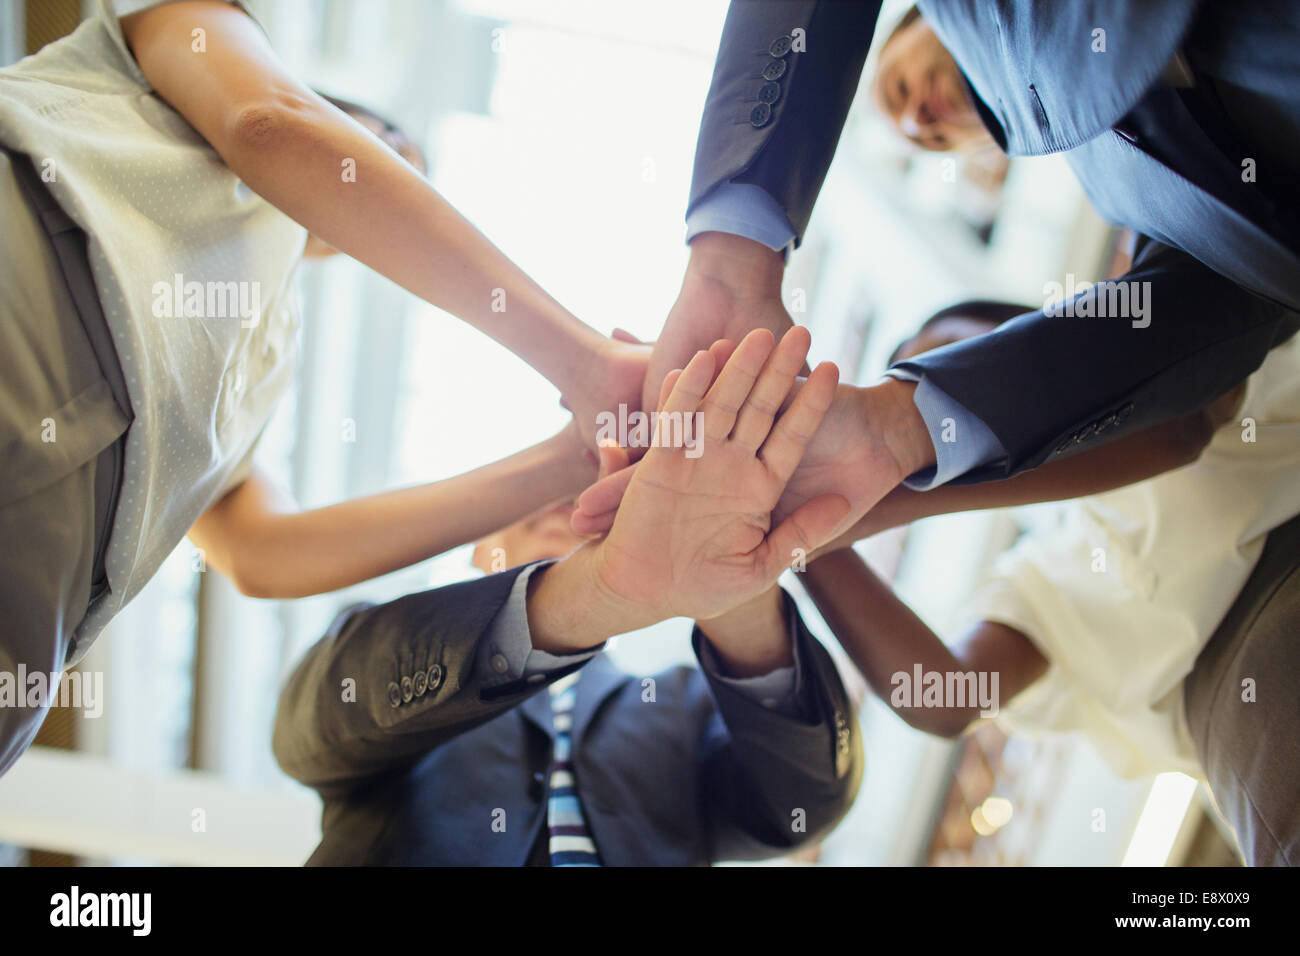 Business people putting hands together Stock Photo